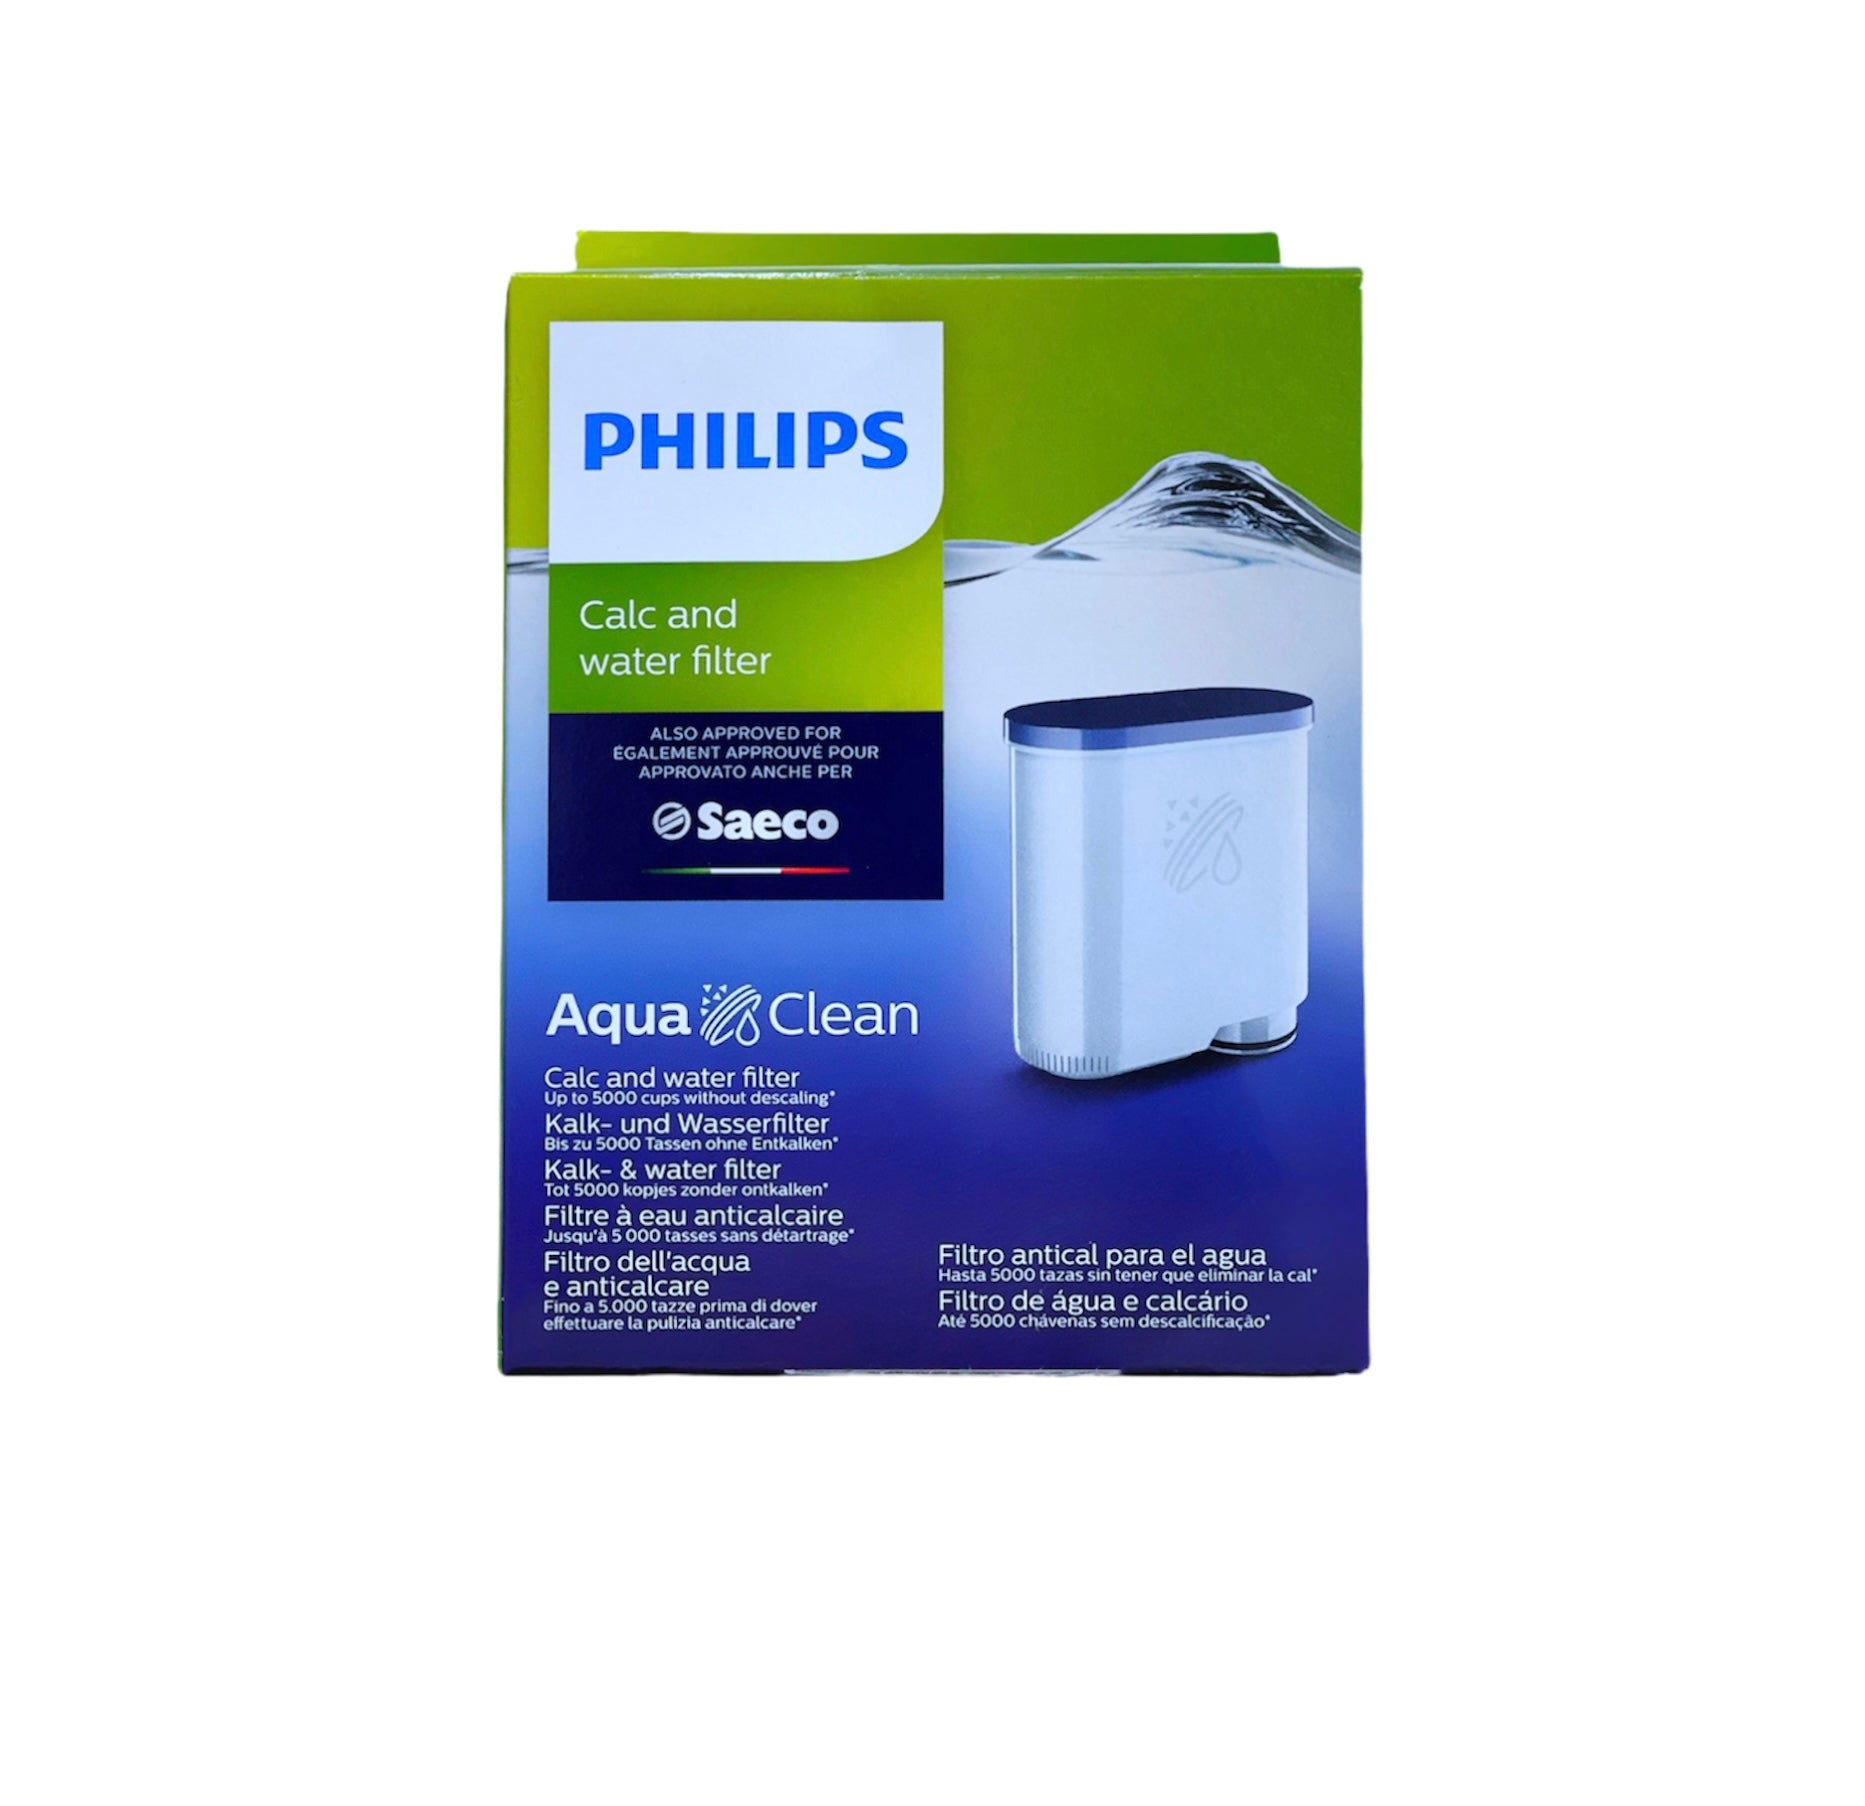 How do you place the AquaClean water filter in your Philips coffee